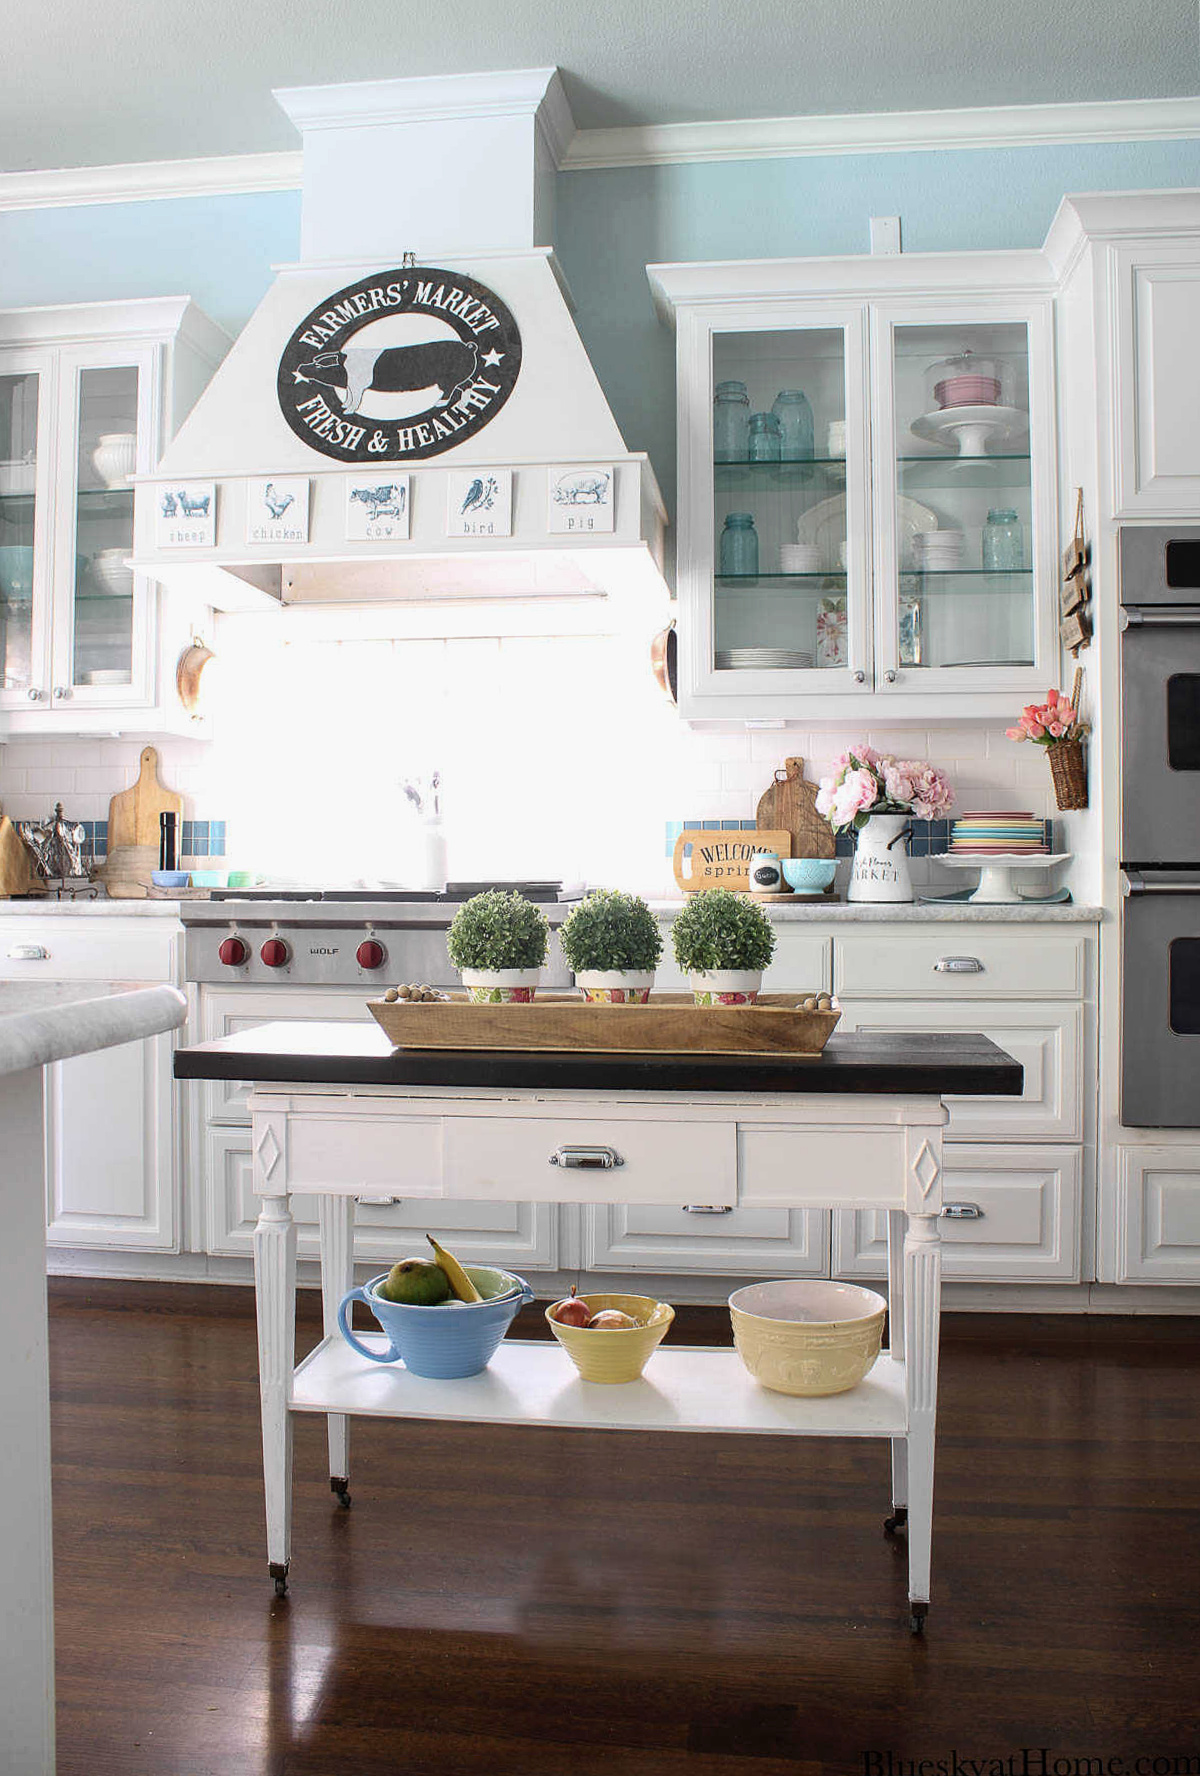 18 Tips to Freshen Up Your Spring Kitchen Decor   Bluesky at Home